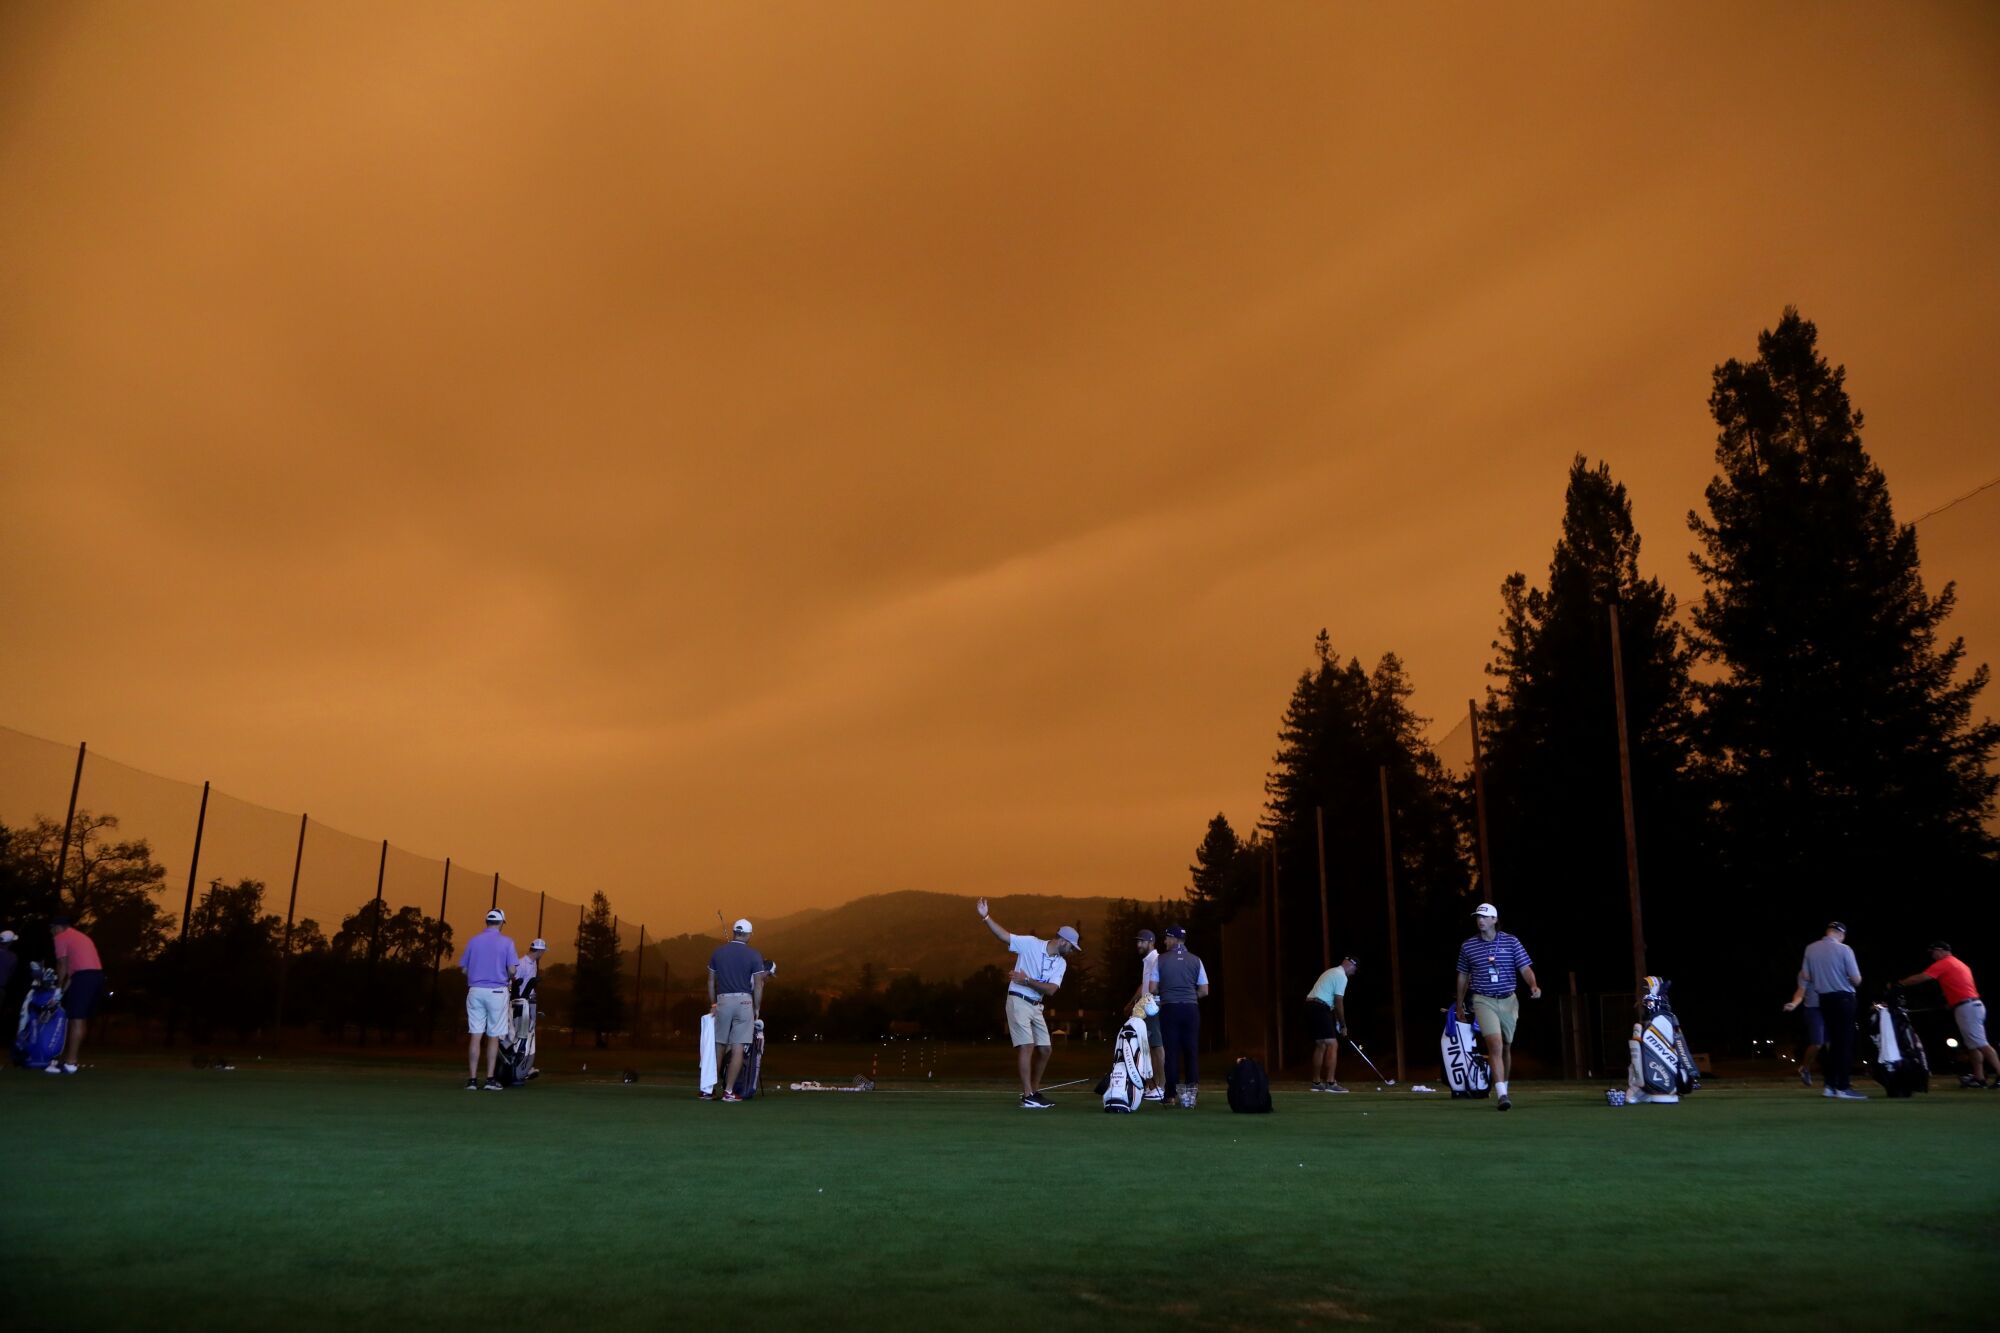 Golfers warm up under orange skies during the preview day of the Safeway Open at Silverado Country Club in Napa.